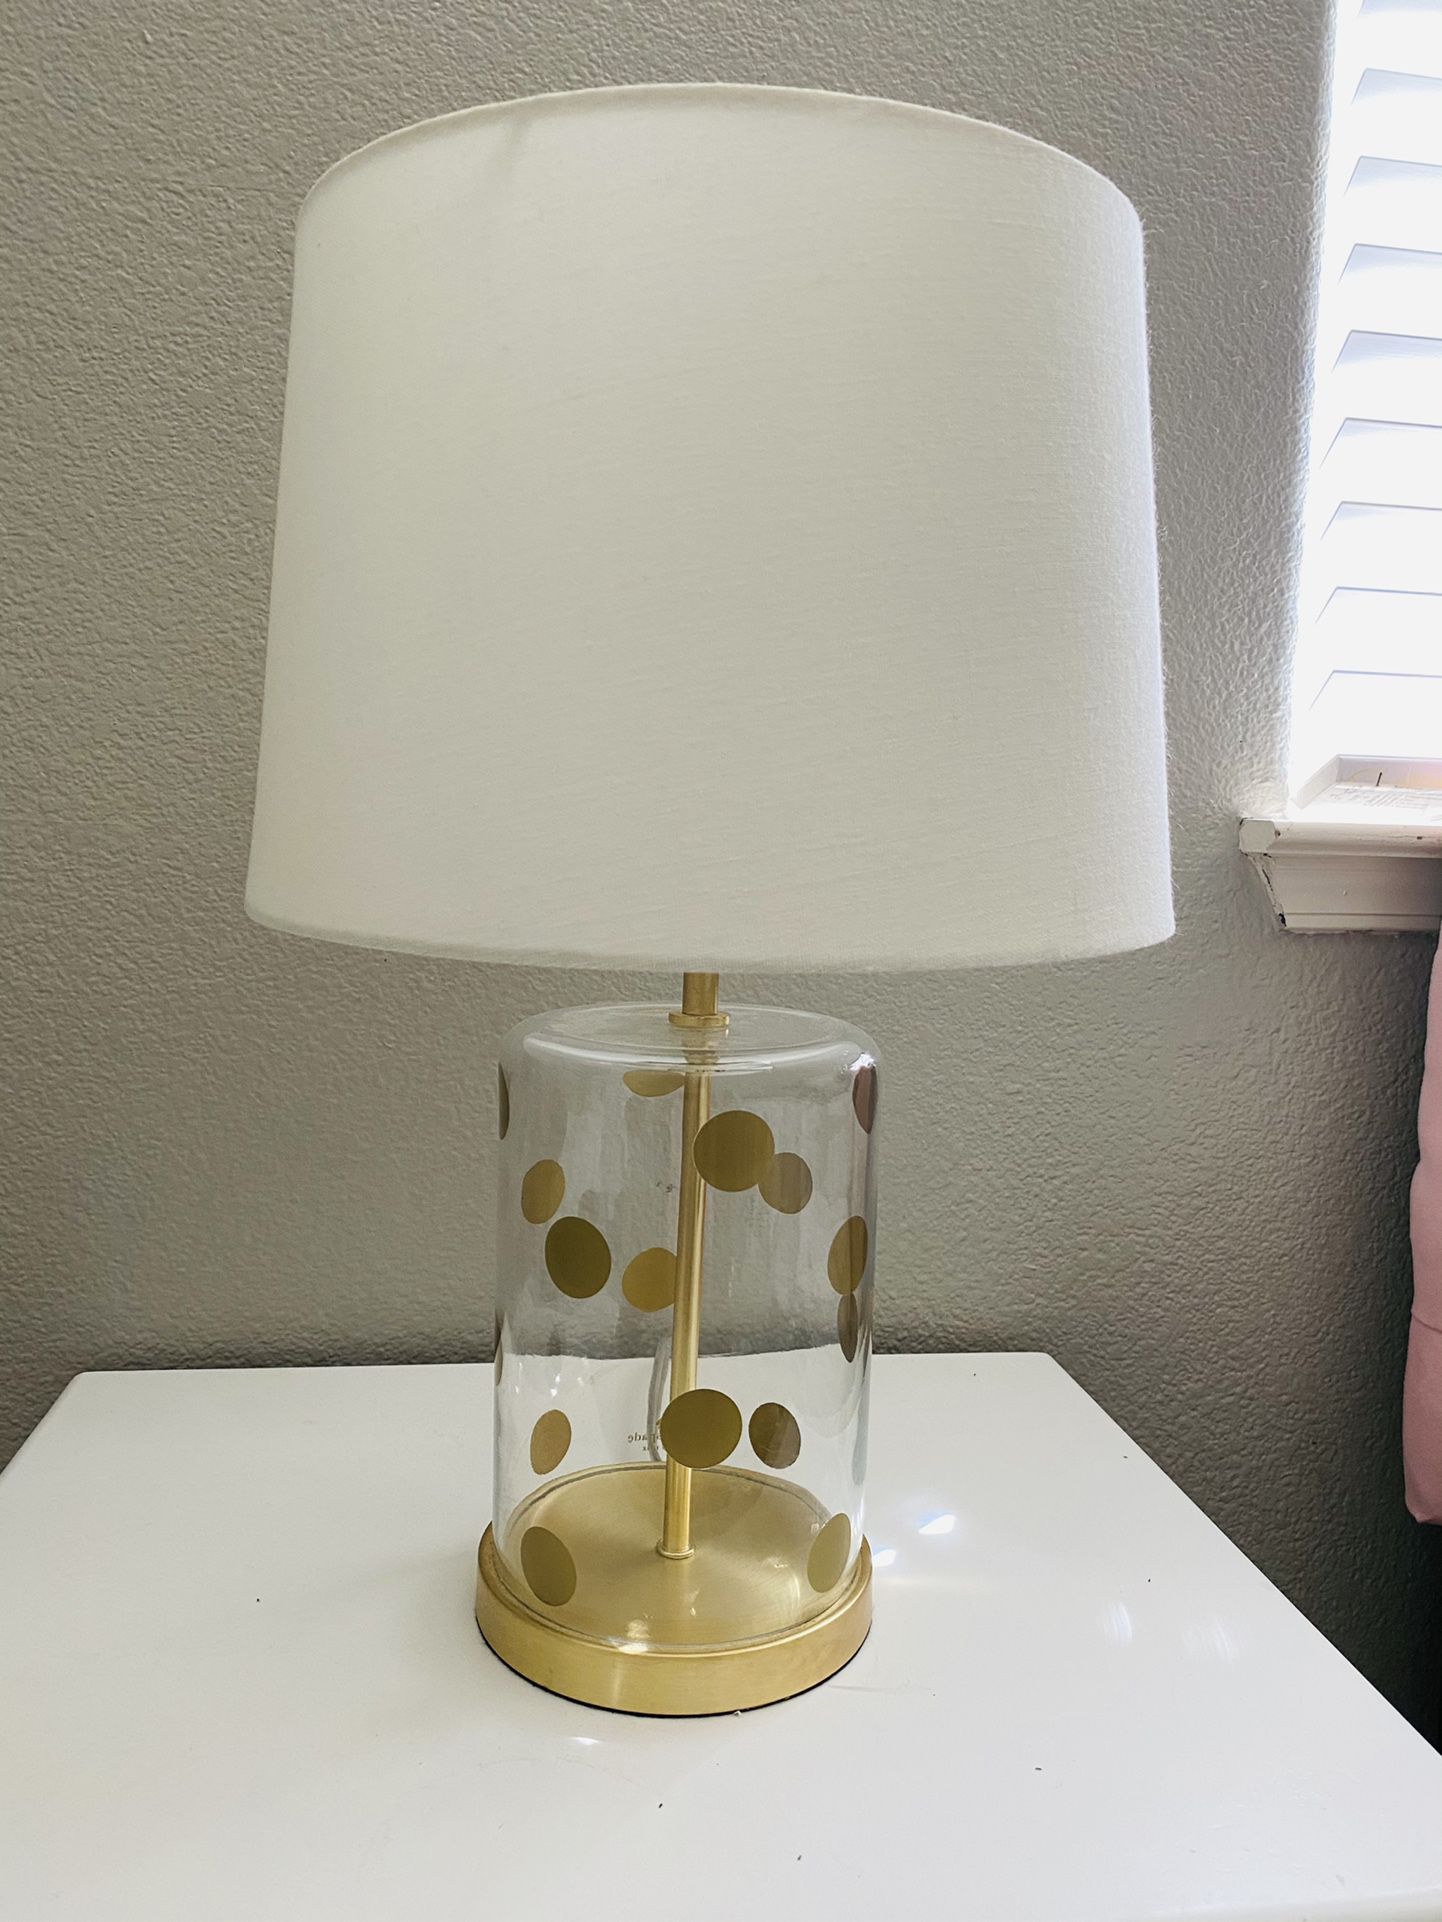 Kate spade Lamp for Sale in Ceres, CA - OfferUp